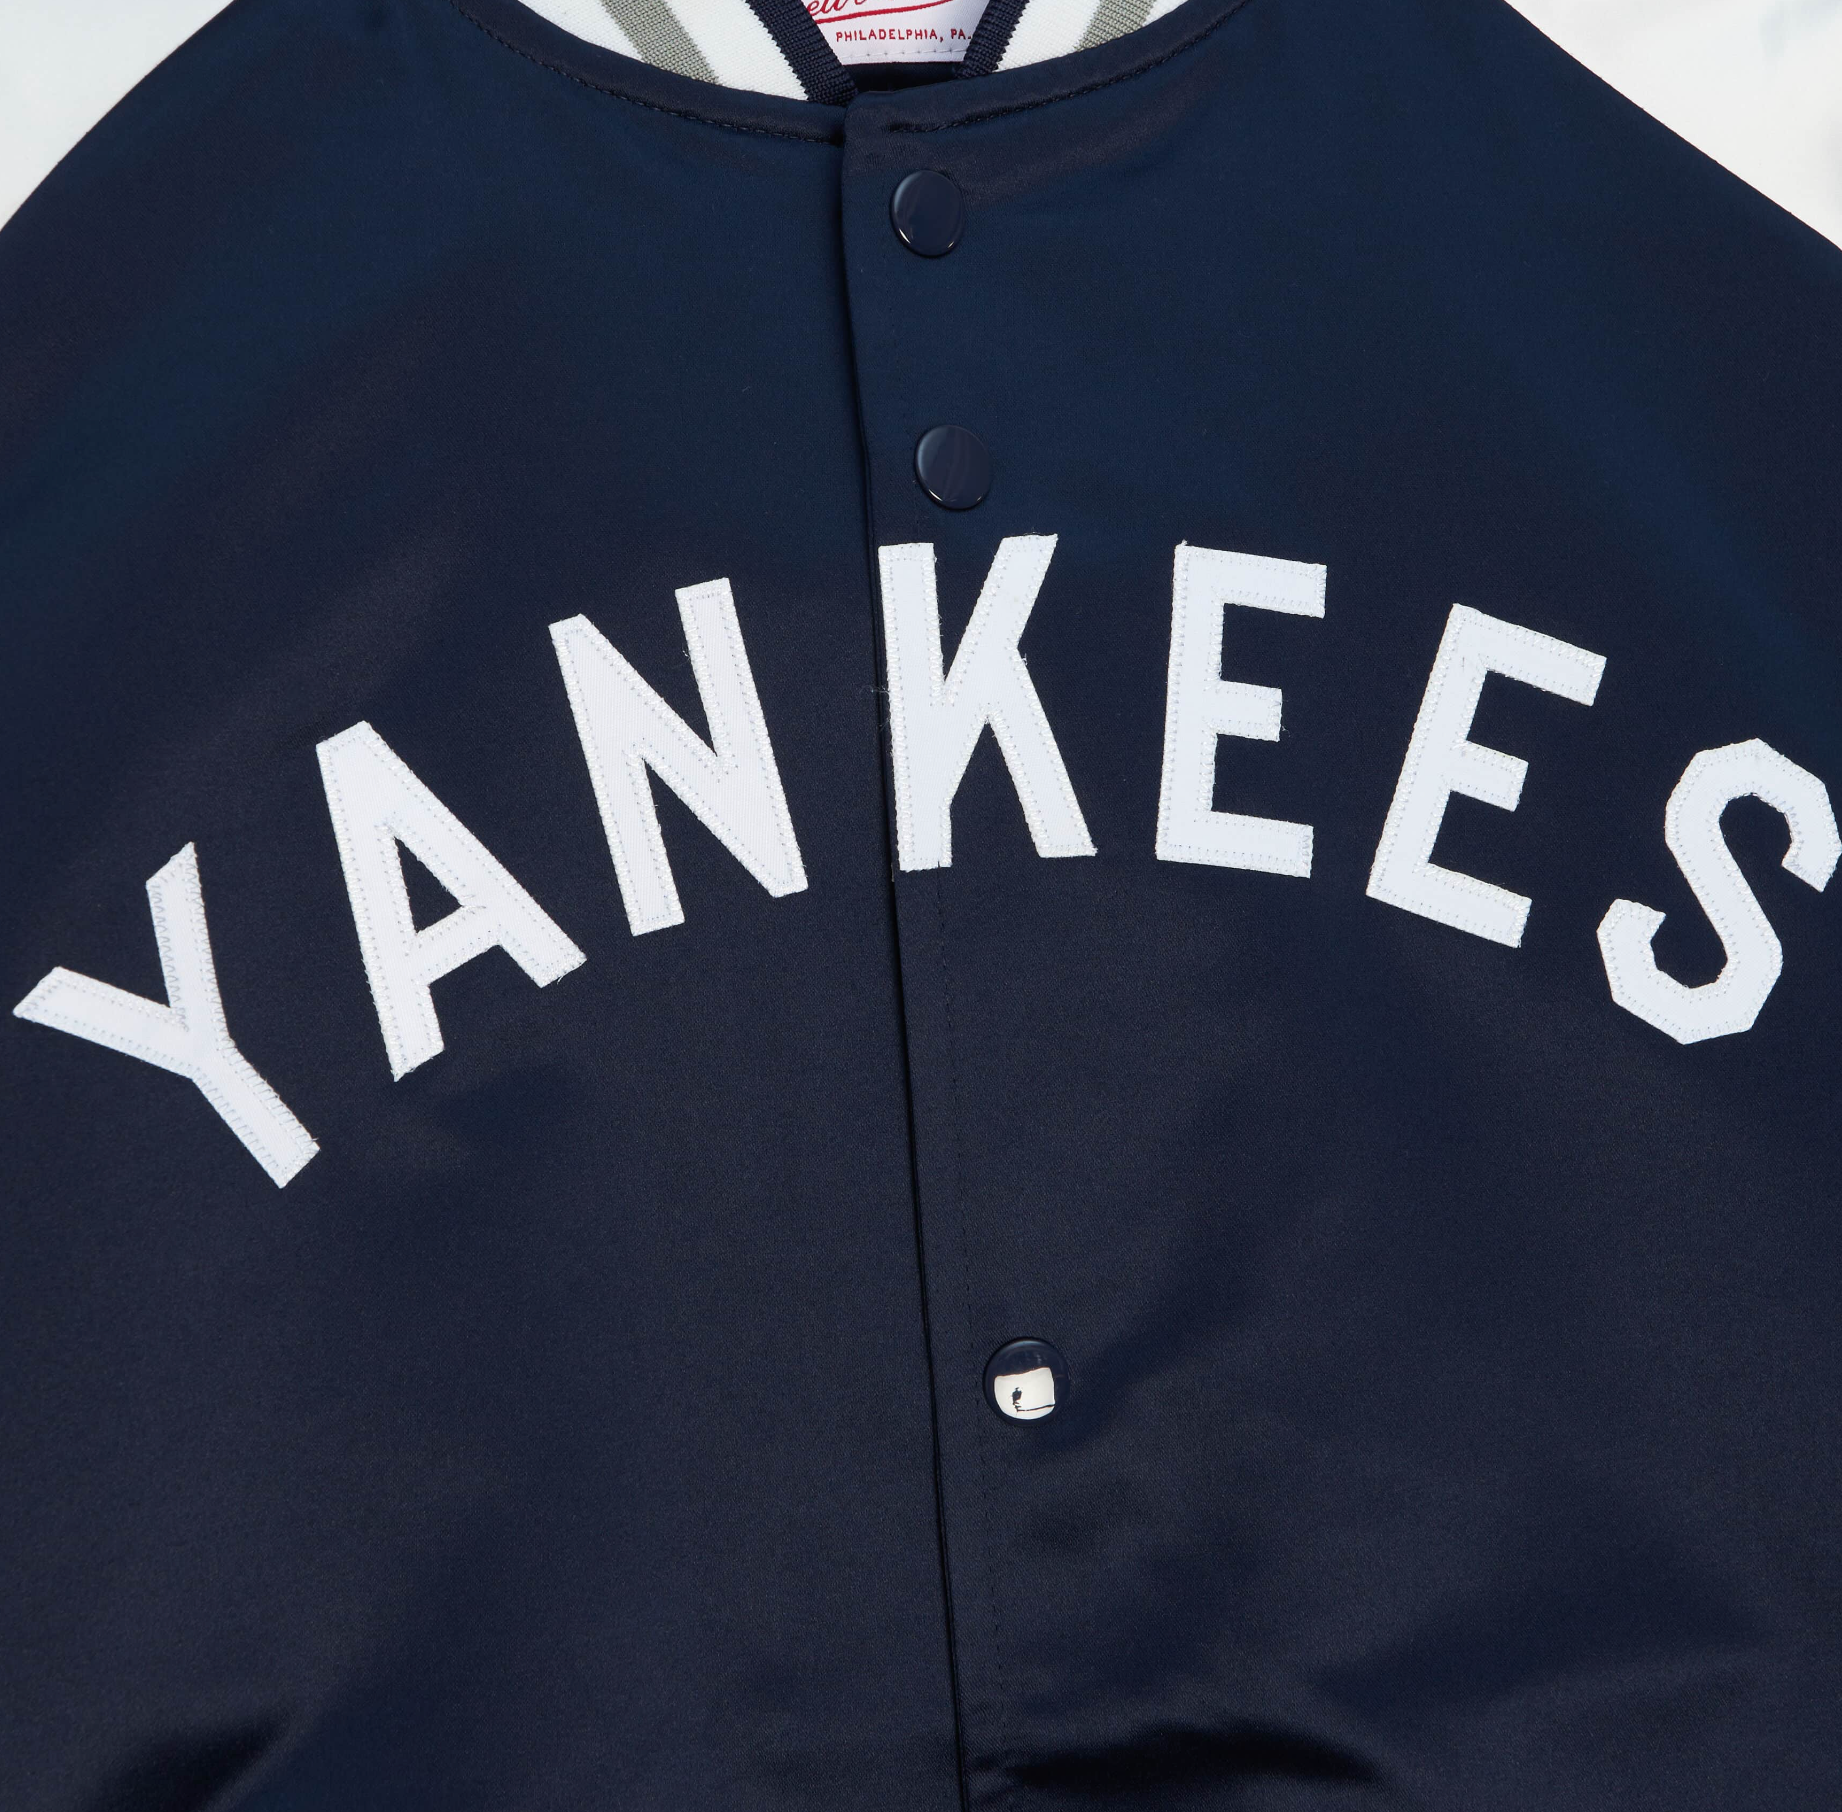 mitchell and ness yankees satin jacket